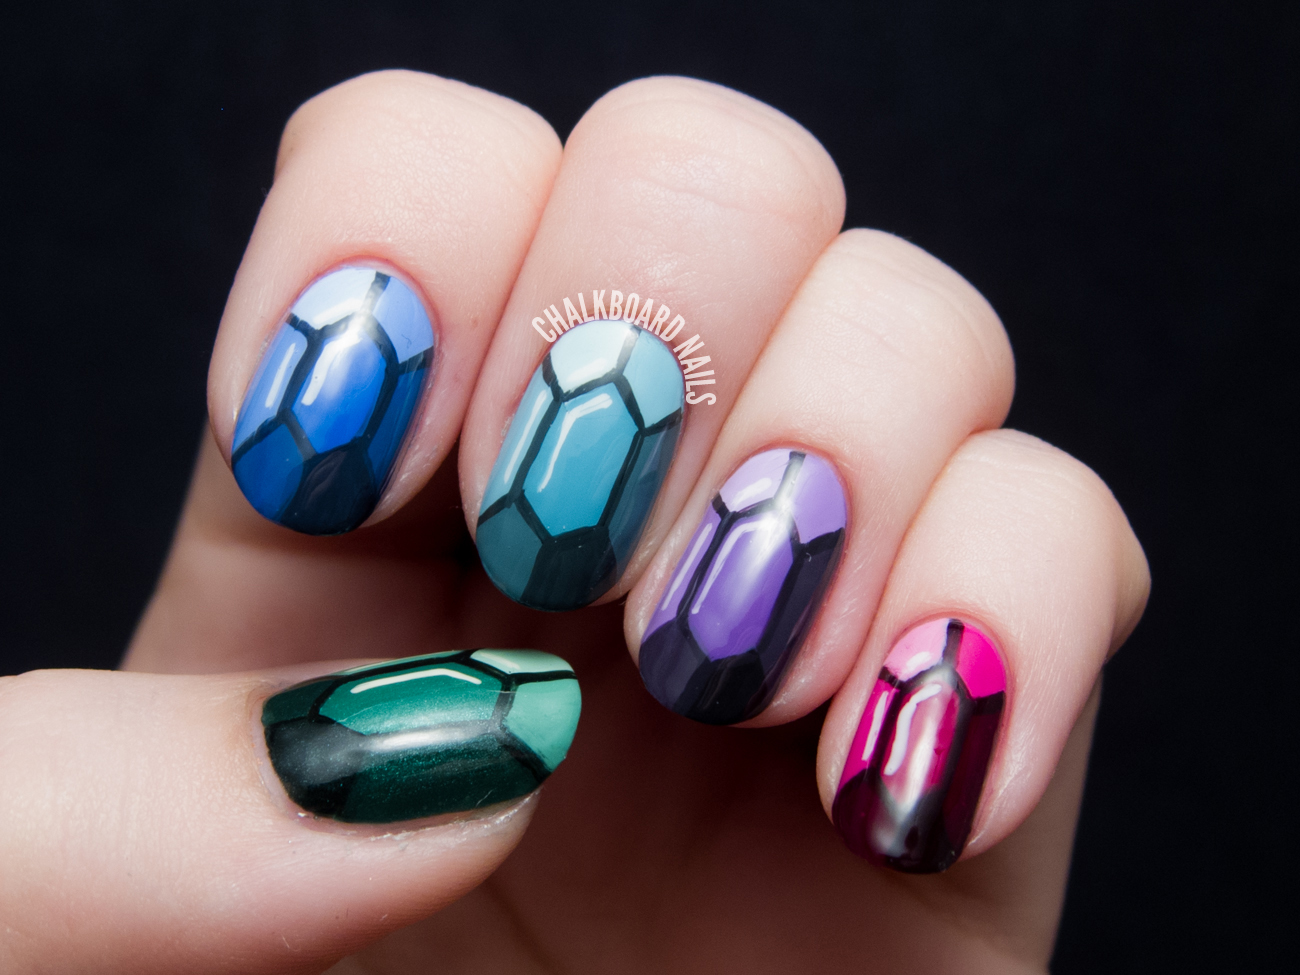 2. How to Choose the Right Size Nail Art Gems - wide 7